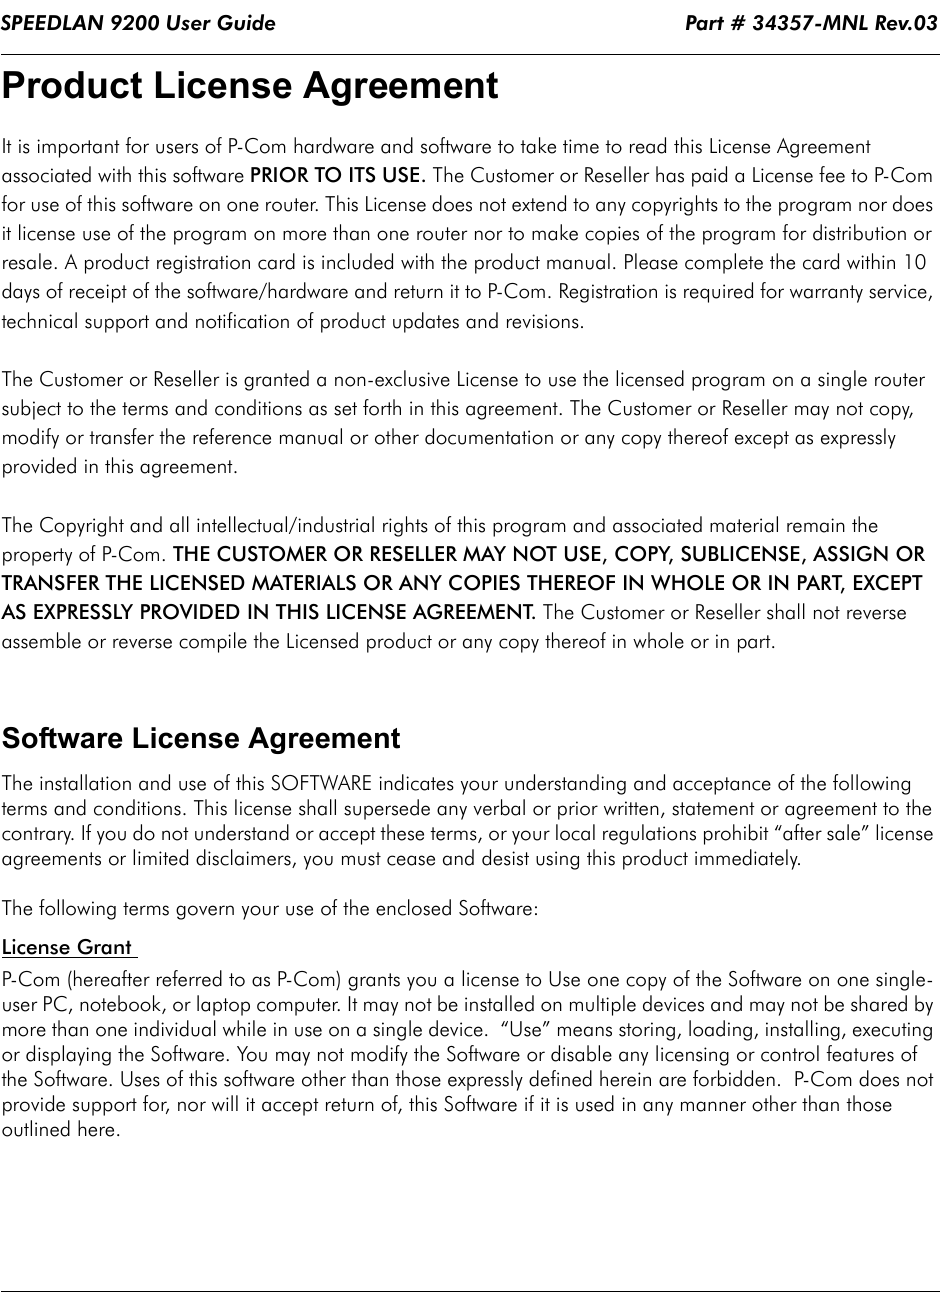 SPEEDLAN 9200 User Guide                                                                   Part # 34357-MNL Rev.03                                            Product License Agreement It is important for users of P-Com hardware and software to take time to read this License Agreement associated with this software PRIOR TO ITS USE. The Customer or Reseller has paid a License fee to P-Com for use of this software on one router. This License does not extend to any copyrights to the program nor does it license use of the program on more than one router nor to make copies of the program for distribution or resale. A product registration card is included with the product manual. Please complete the card within 10 days of receipt of the software/hardware and return it to P-Com. Registration is required for warranty service, technical support and notification of product updates and revisions.  The Customer or Reseller is granted a non-exclusive License to use the licensed program on a single router subject to the terms and conditions as set forth in this agreement. The Customer or Reseller may not copy, modify or transfer the reference manual or other documentation or any copy thereof except as expressly provided in this agreement. The Copyright and all intellectual/industrial rights of this program and associated material remain the property of P-Com. THE CUSTOMER OR RESELLER MAY NOT USE, COPY, SUBLICENSE, ASSIGN OR TRANSFER THE LICENSED MATERIALS OR ANY COPIES THEREOF IN WHOLE OR IN PART, EXCEPT AS EXPRESSLY PROVIDED IN THIS LICENSE AGREEMENT. The Customer or Reseller shall not reverse assemble or reverse compile the Licensed product or any copy thereof in whole or in part.   Software License AgreementThe installation and use of this SOFTWARE indicates your understanding and acceptance of the following terms and conditions. This license shall supersede any verbal or prior written, statement or agreement to the contrary. If you do not understand or accept these terms, or your local regulations prohibit “after sale” license agreements or limited disclaimers, you must cease and desist using this product immediately. The following terms govern your use of the enclosed Software:License Grant P-Com (hereafter referred to as P-Com) grants you a license to Use one copy of the Software on one single-user PC, notebook, or laptop computer. It may not be installed on multiple devices and may not be shared by more than one individual while in use on a single device.  “Use” means storing, loading, installing, executing or displaying the Software. You may not modify the Software or disable any licensing or control features of the Software. Uses of this software other than those expressly defined herein are forbidden.  P-Com does not provide support for, nor will it accept return of, this Software if it is used in any manner other than those outlined here.             